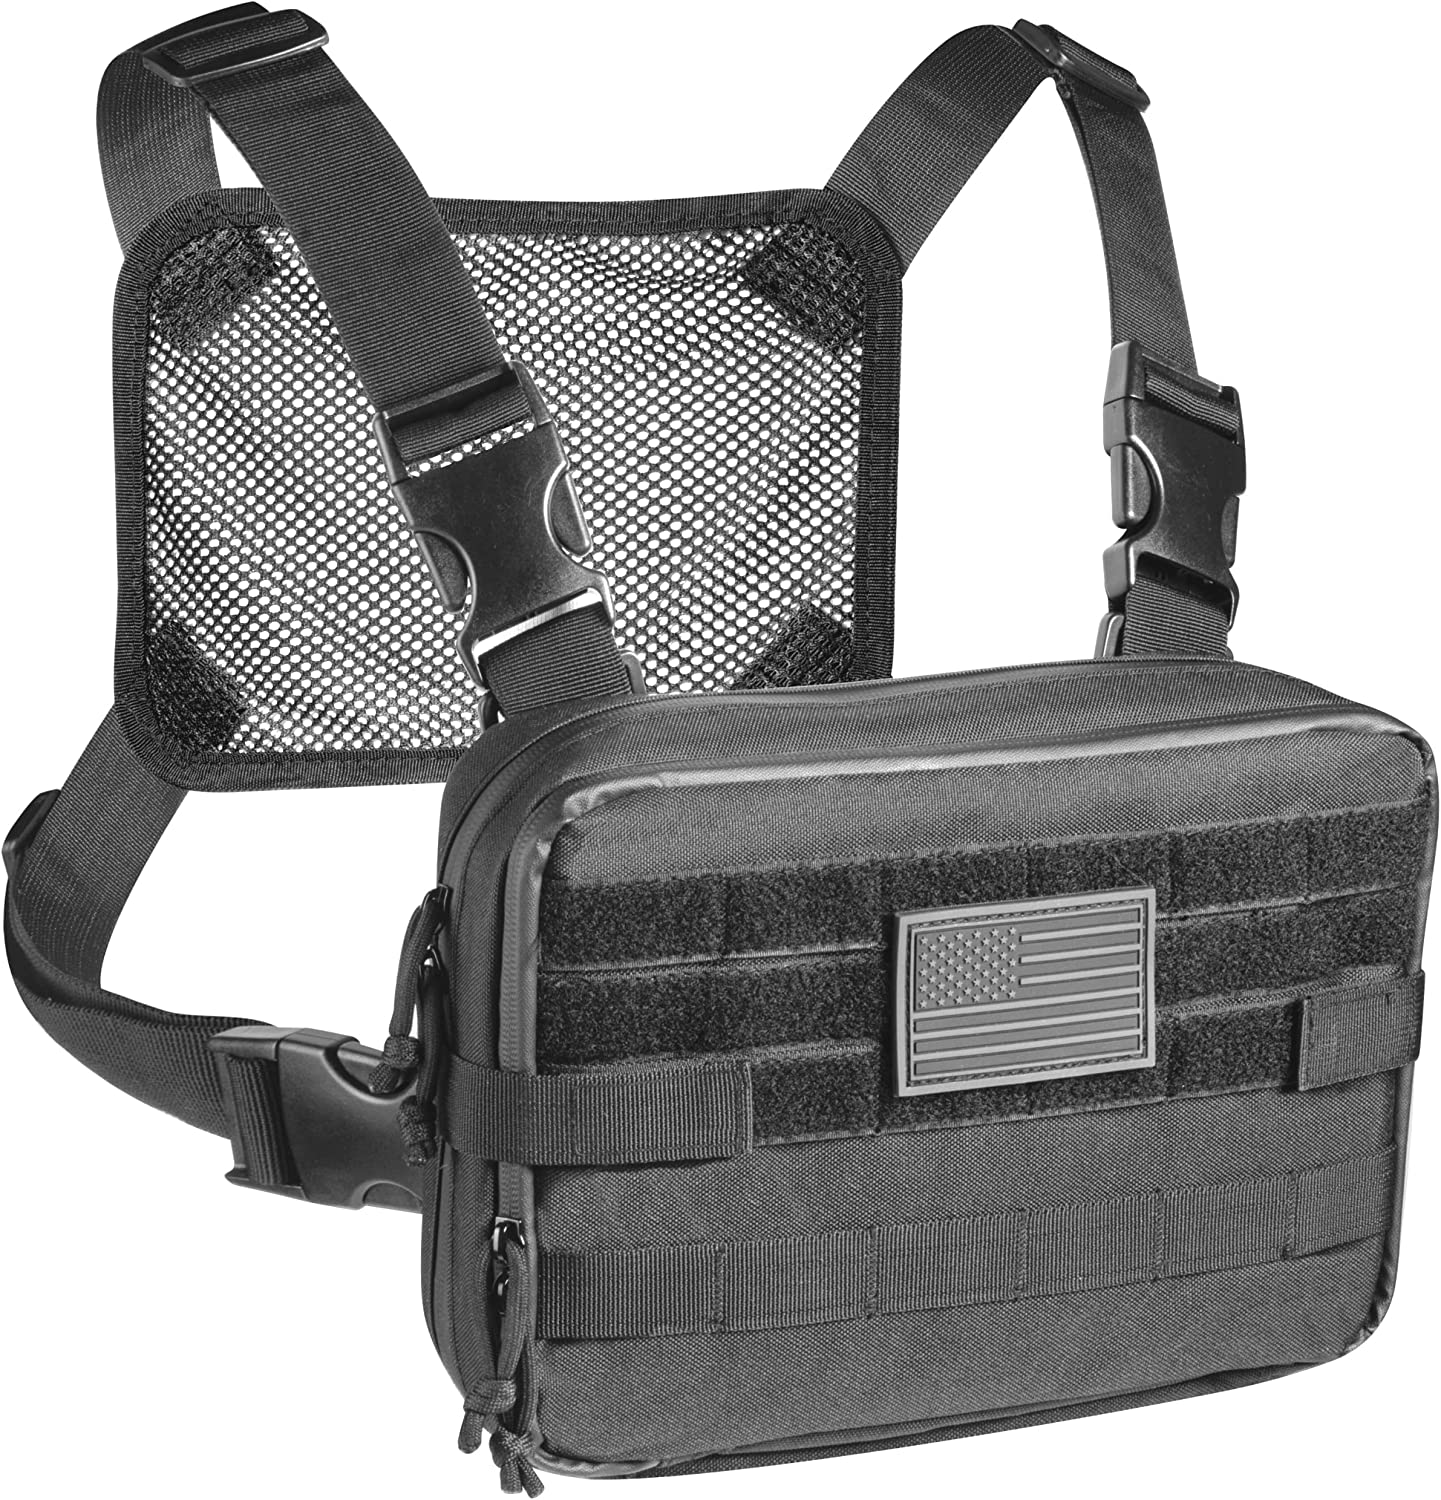 Tactical Chest Rig Bag For Men – Our Tactical Chest Pack Is Great For Hiking, Hunting, And Shooting – Two Utility Pockets Hold All Your Gear – Molle System With Adjustable And Removable Straps – Black